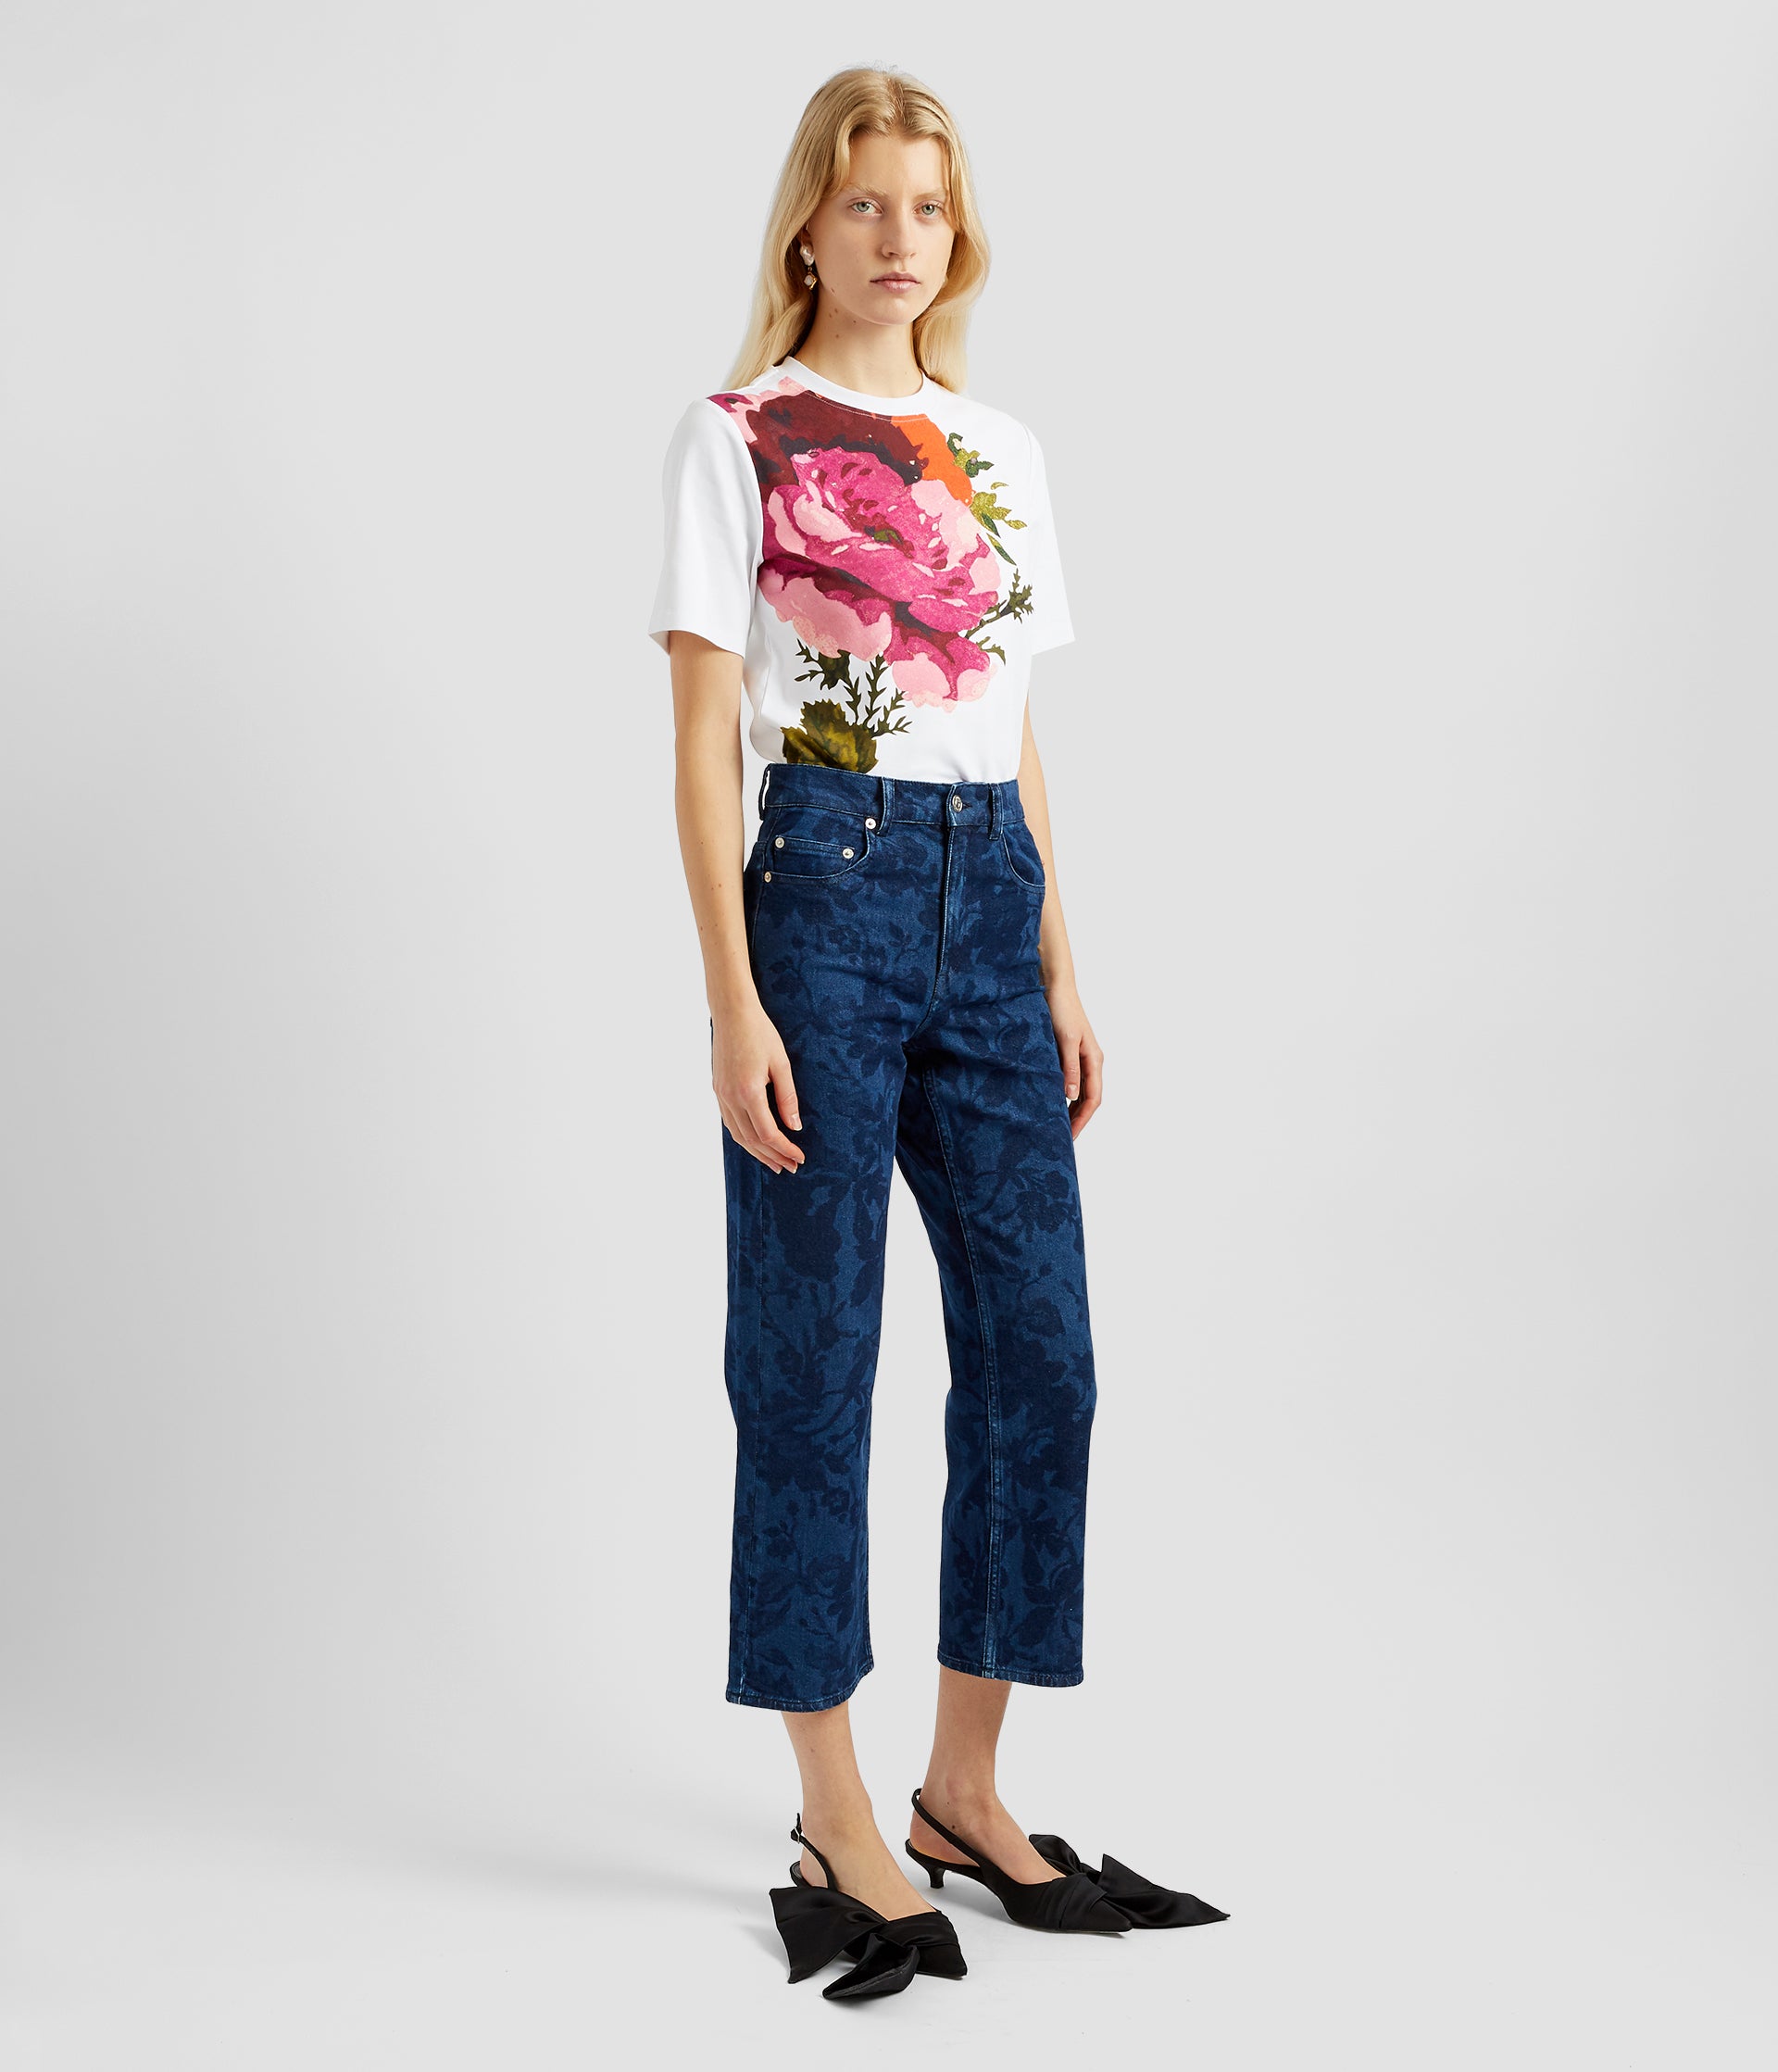 Straight leg floral print jeans. A feminine twist on the classic, these straight leg jeans feature a bold but subtle floral print. Worn here with a t-shirt. 